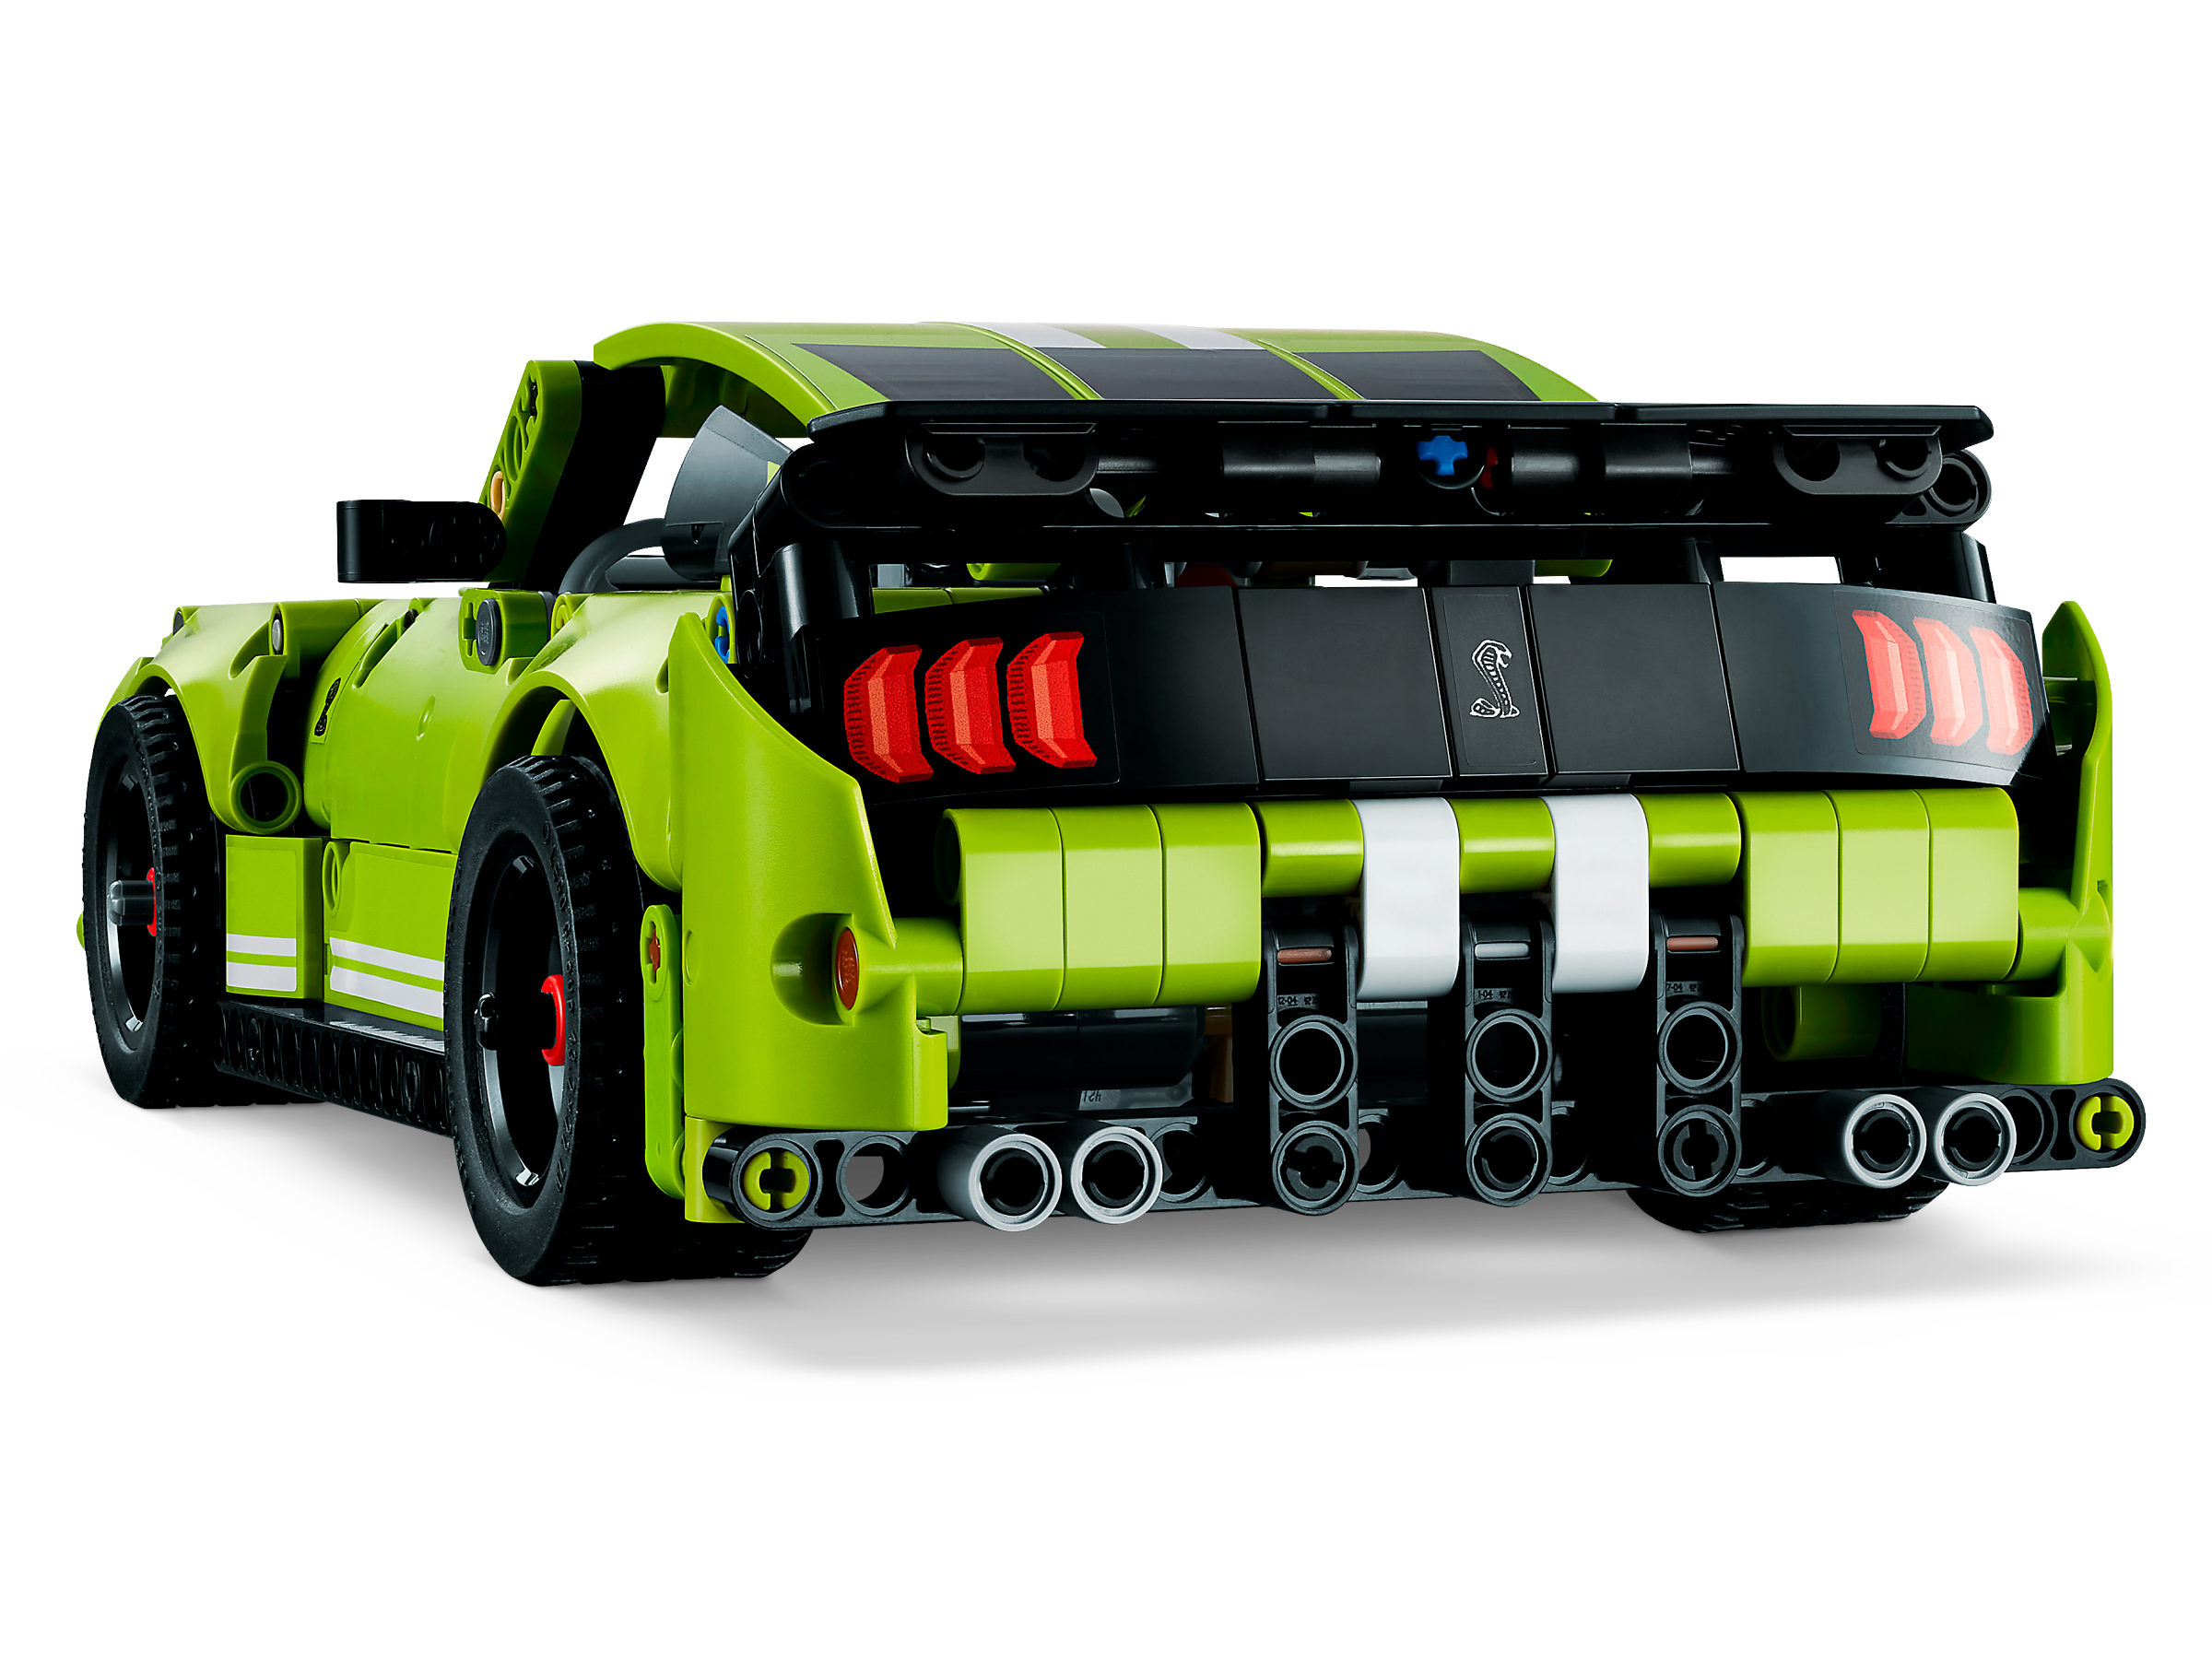 Ford Mustang Shelby® GT500® 42138, Technic™